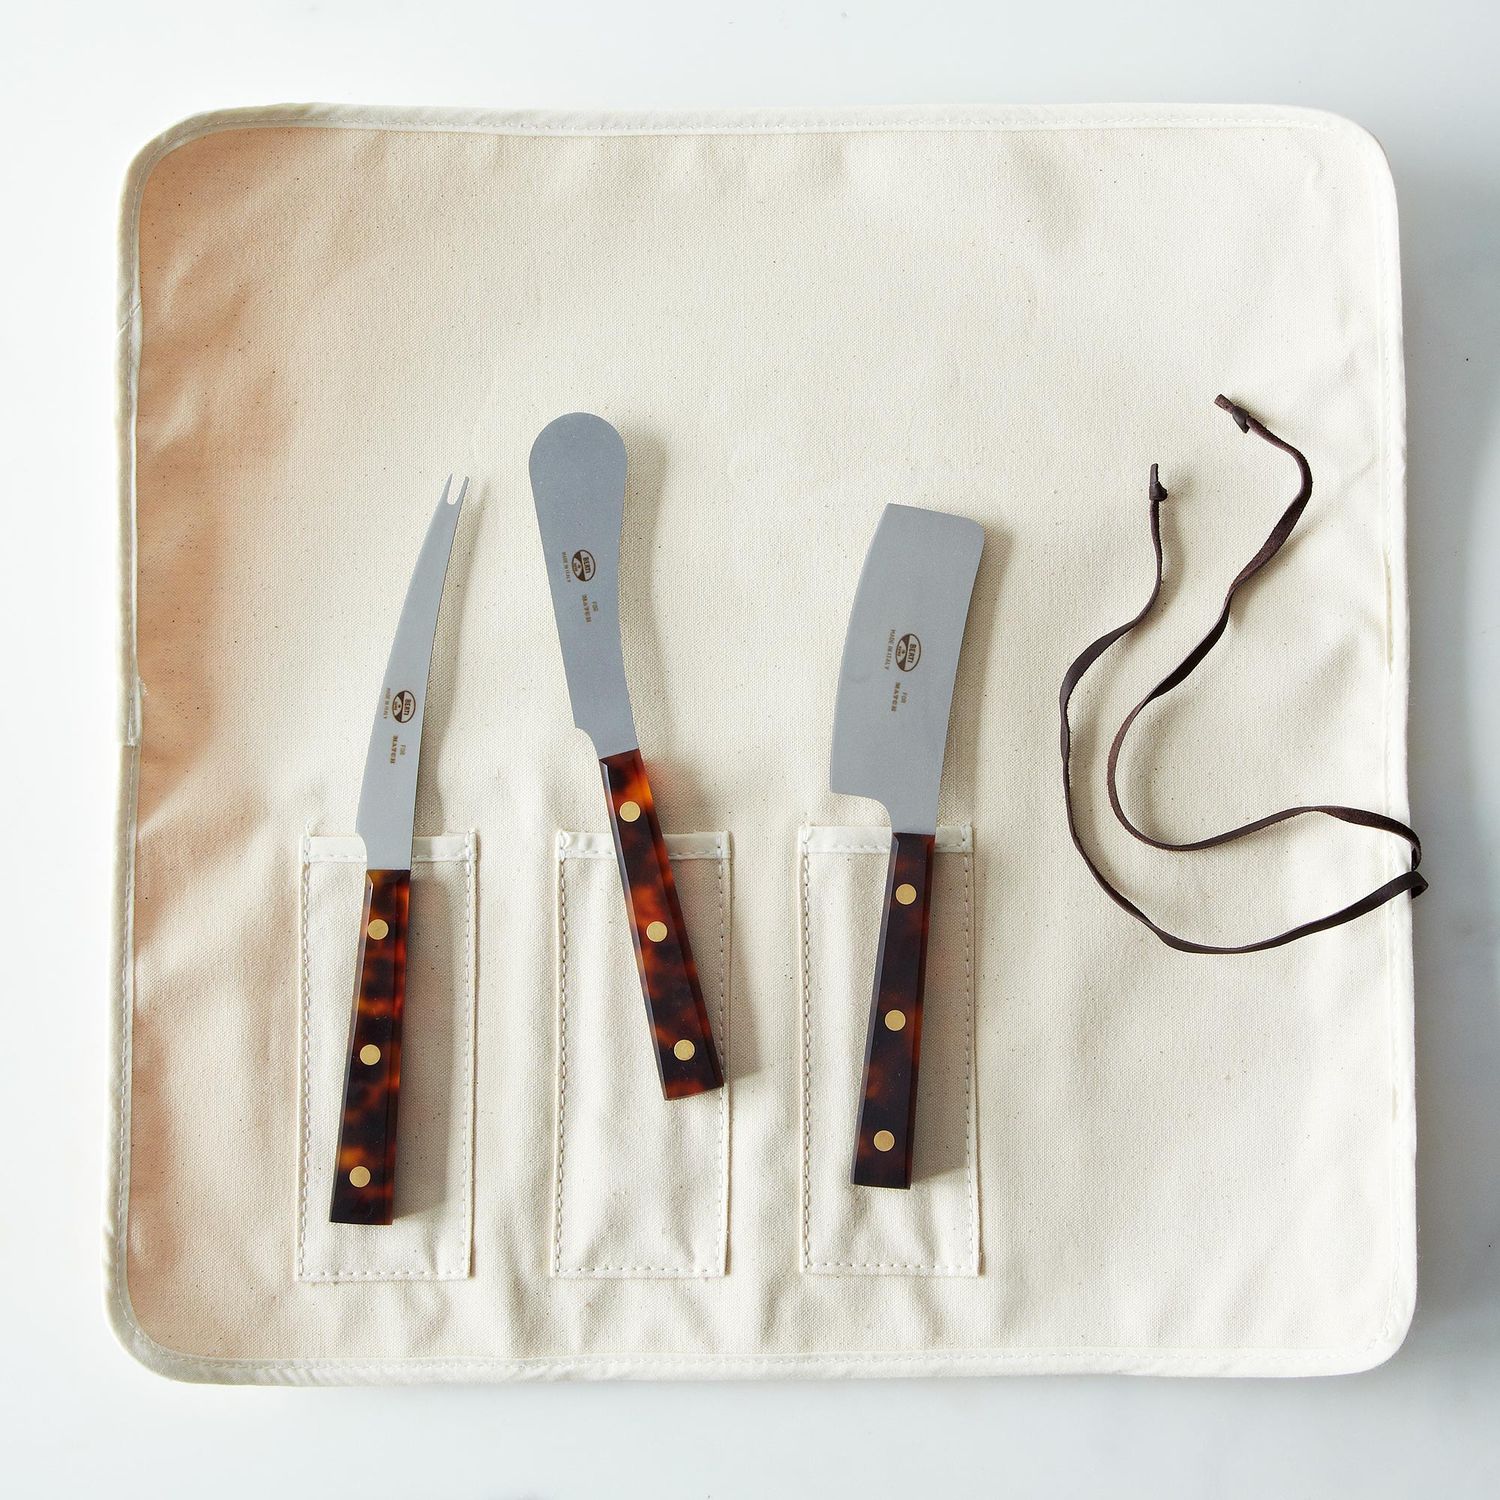 Berti Cheese Knives (Set of 3) in Tortoise Lucite or Boxwood on Food52